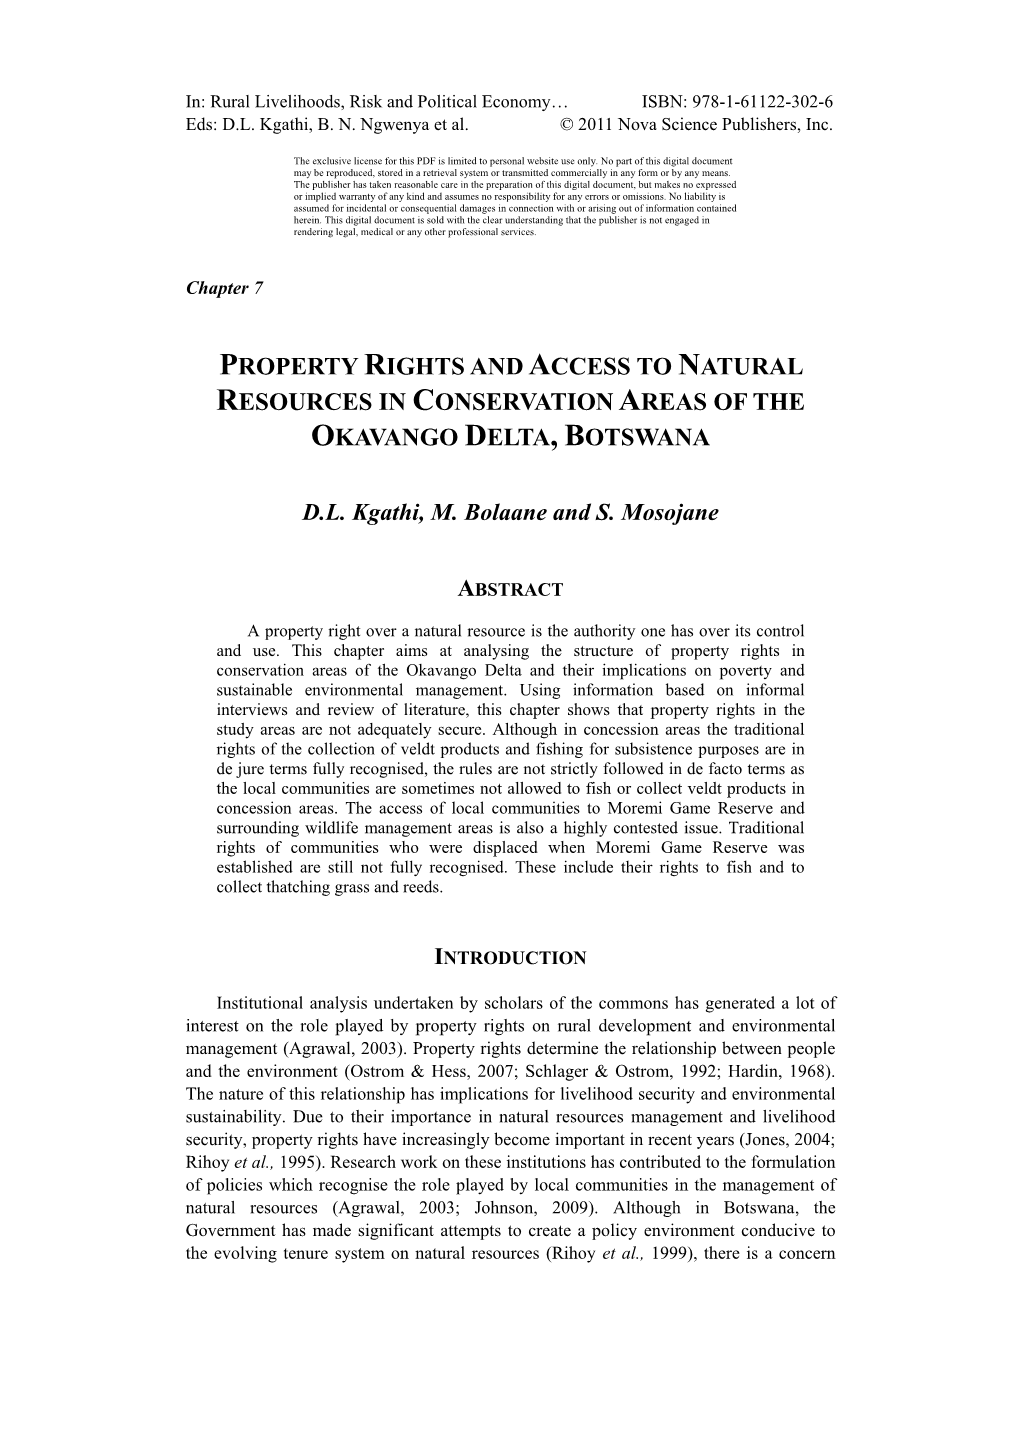 Property Rights and Access to Natural Resources in Conservation Areas of the Okavango Delta, Botswana